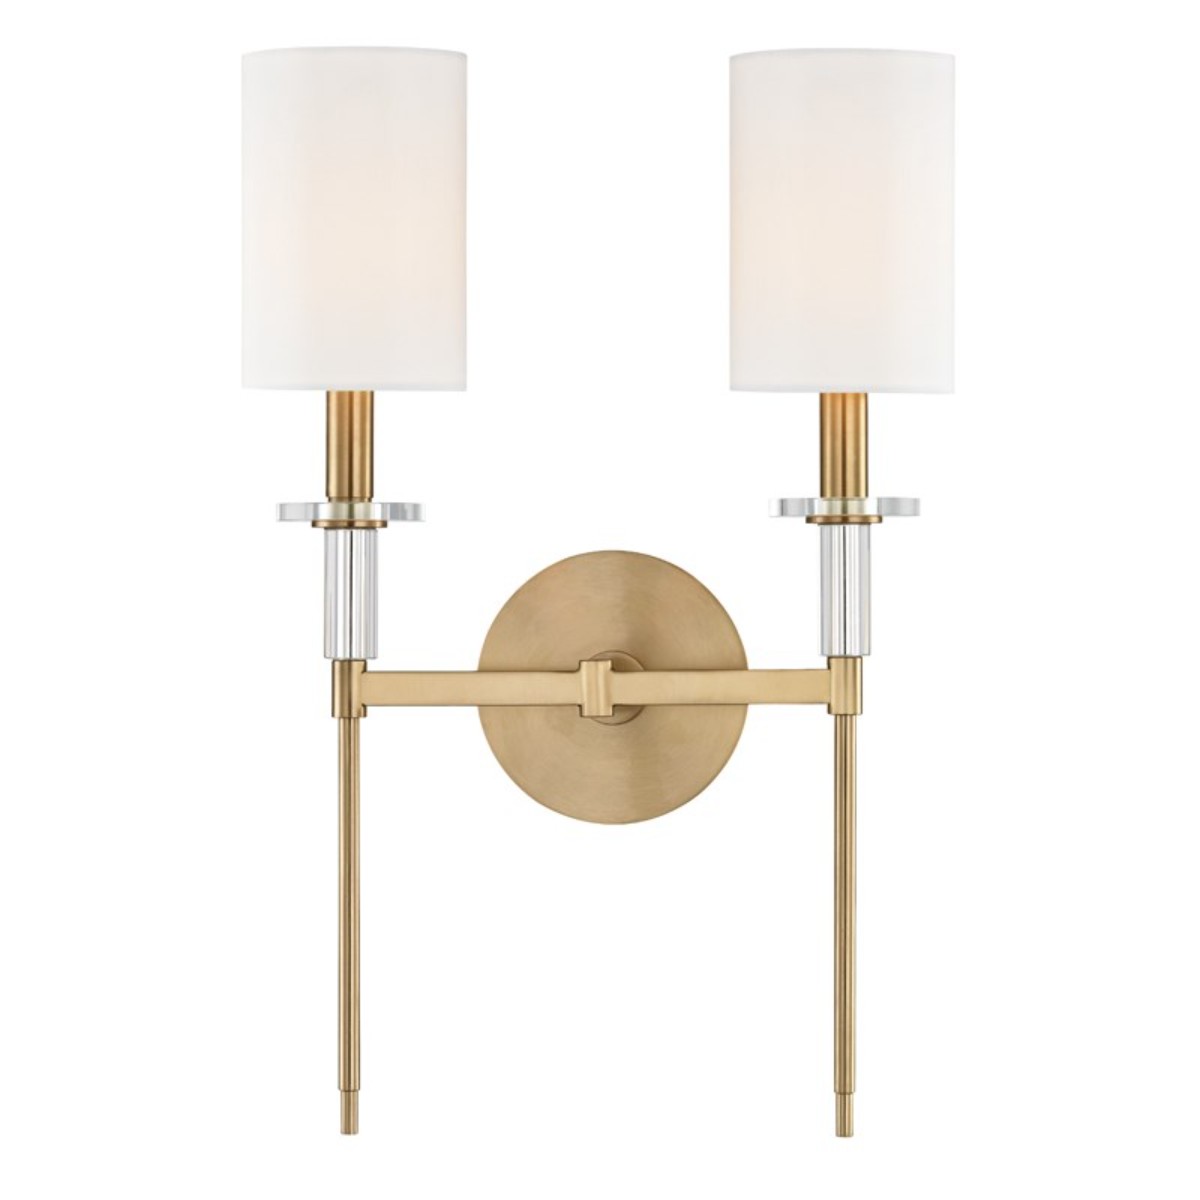 Hudson Valley | Amherst Double Wall Light | Aged Brass